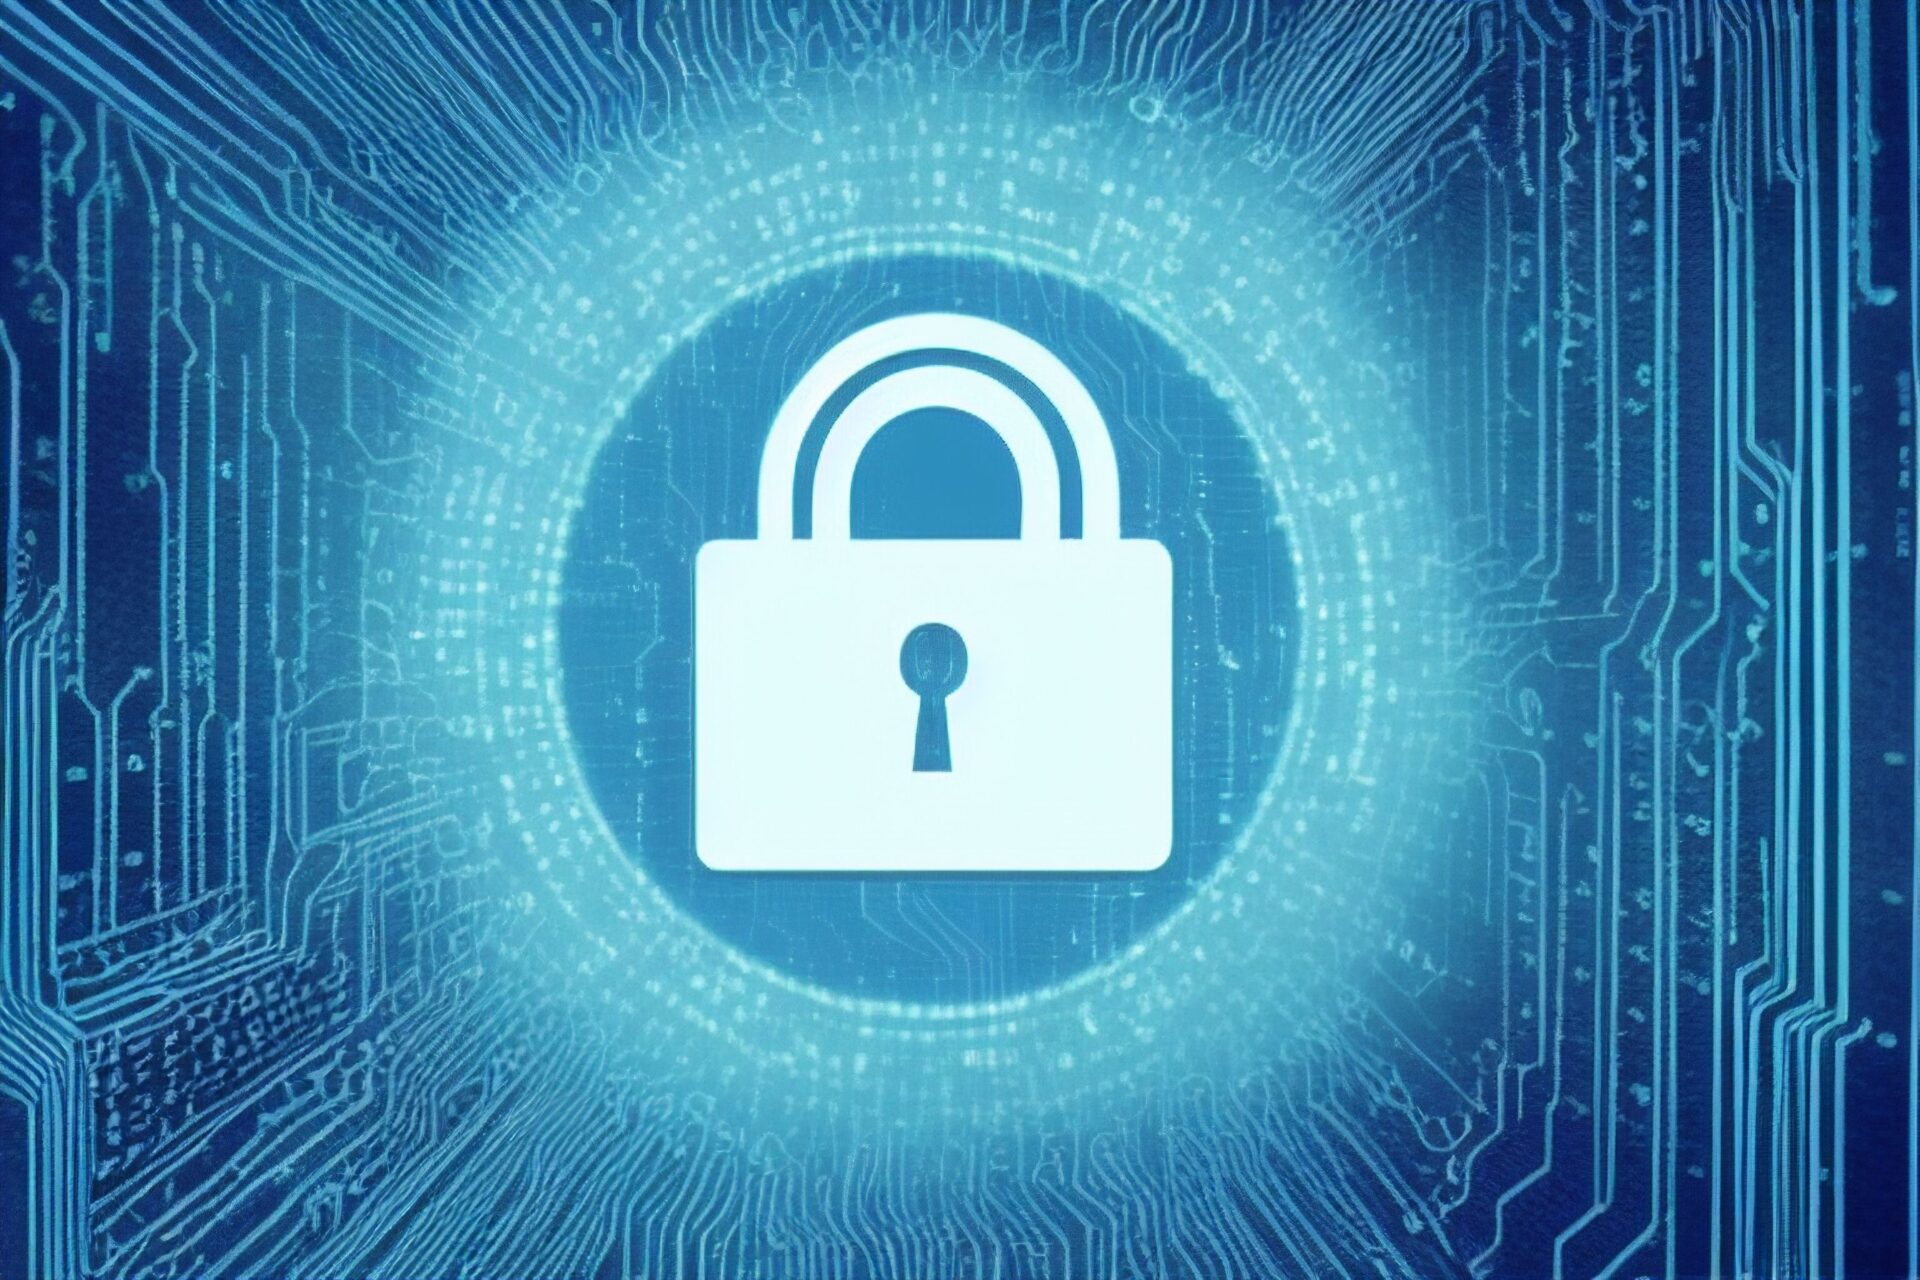 IT Security, Cyber Security, image on the topic of IT security that features a lock at the center of the image as a central symbol for protection and security. Surround the lock with circuitry and electronic components in the background to establish a connection to the digital world and technology.